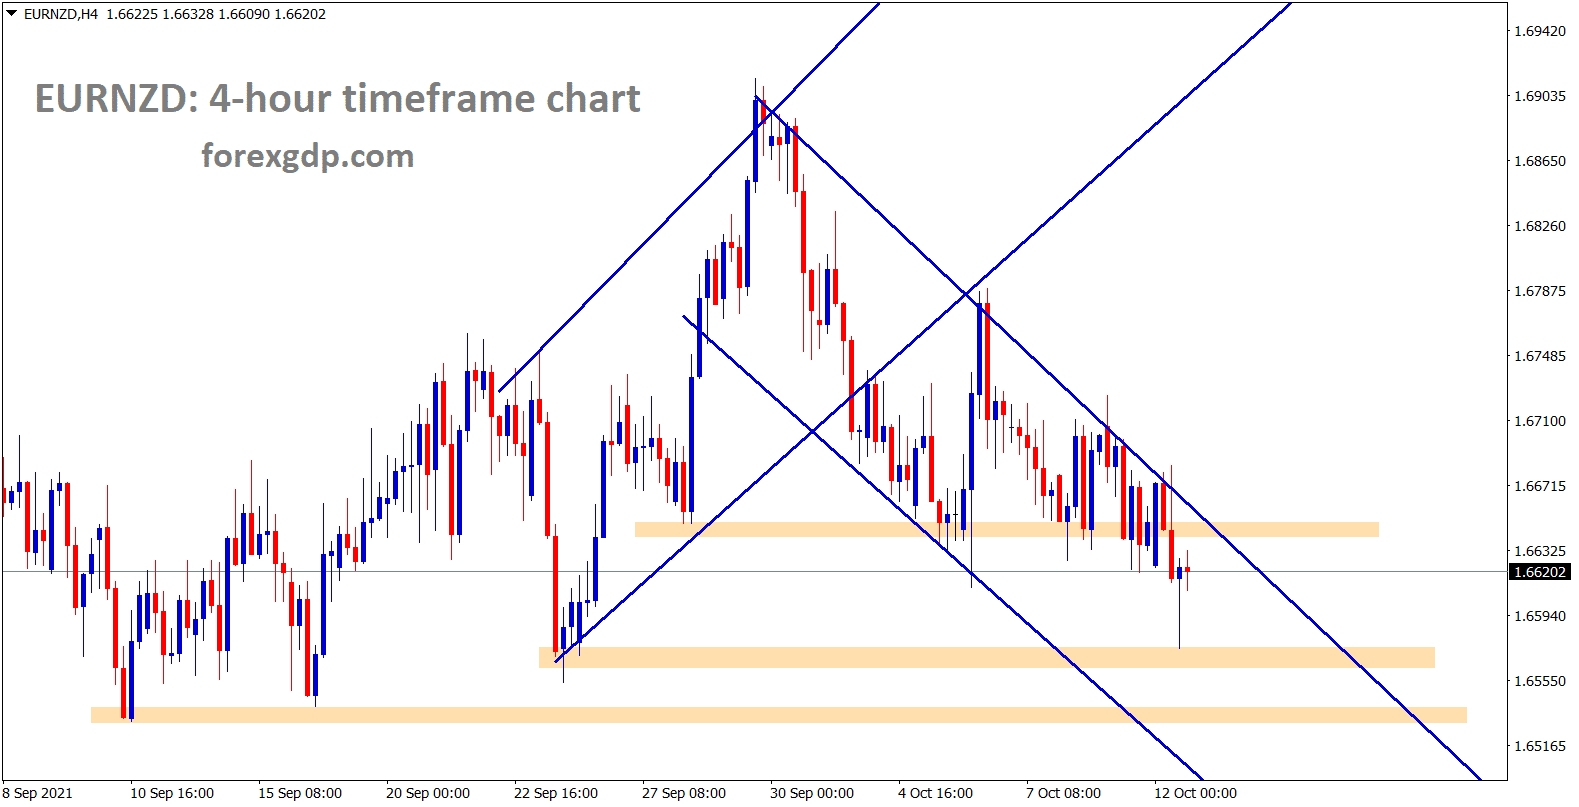 EURNZD is moving down in a descending channel breaking the lows continuously